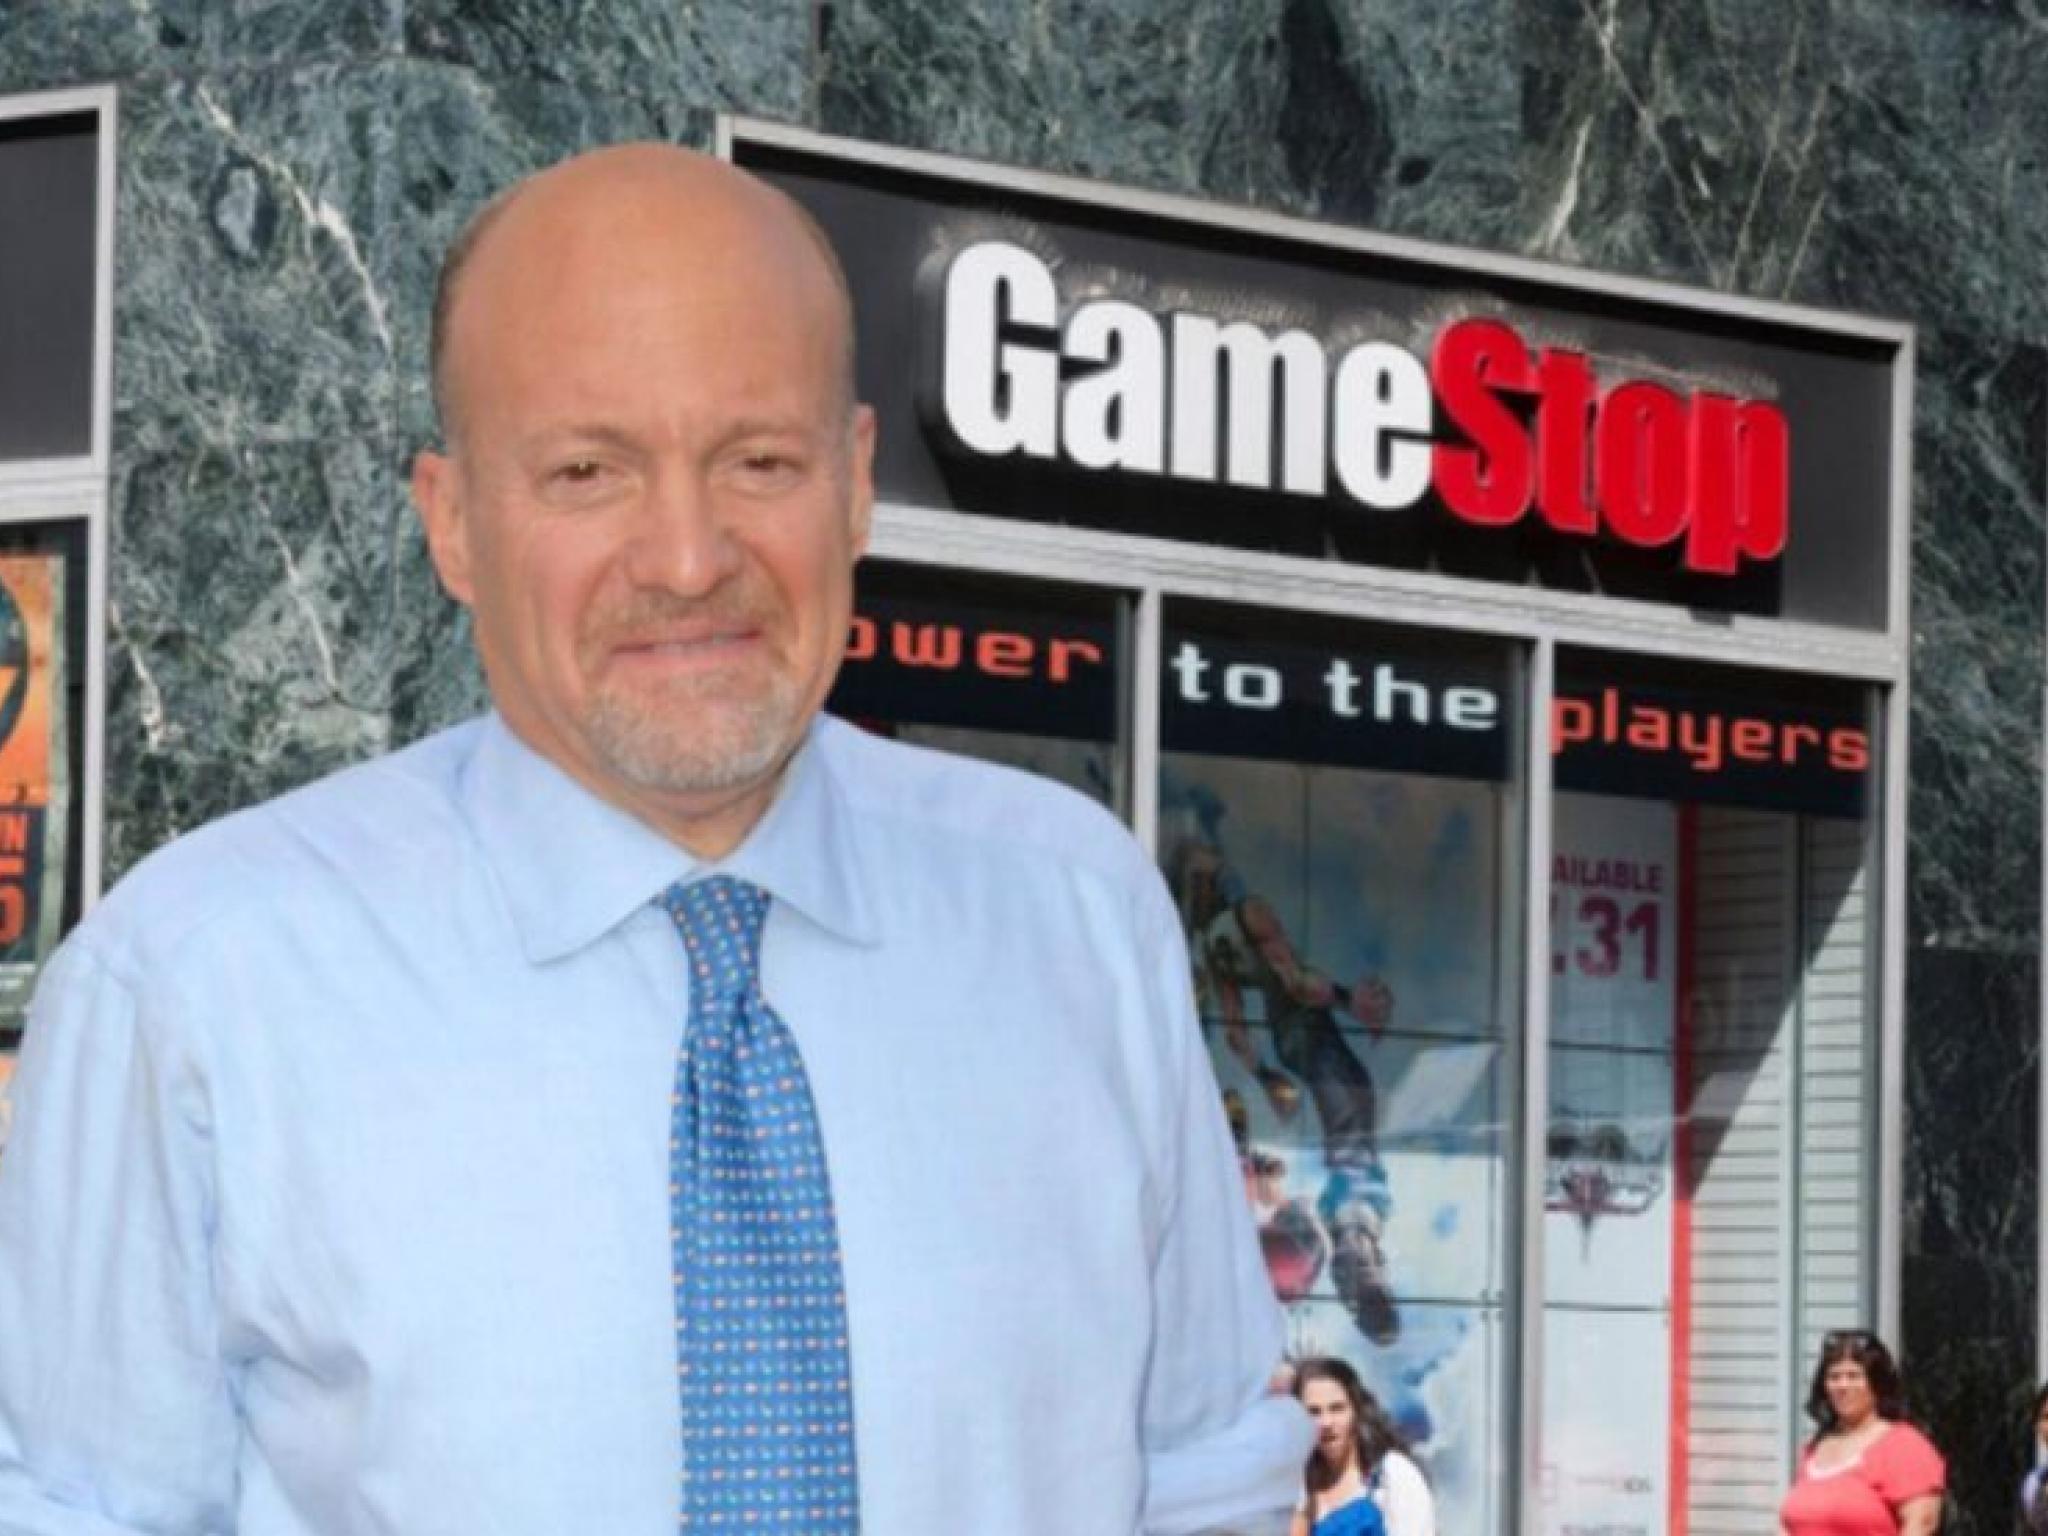  jim-cramer-who-once-called-gamestop-arguably-the-worst-company-in-america-says-it-now-has-enough-cash-to-become-something-other-than-a-meme-stock 